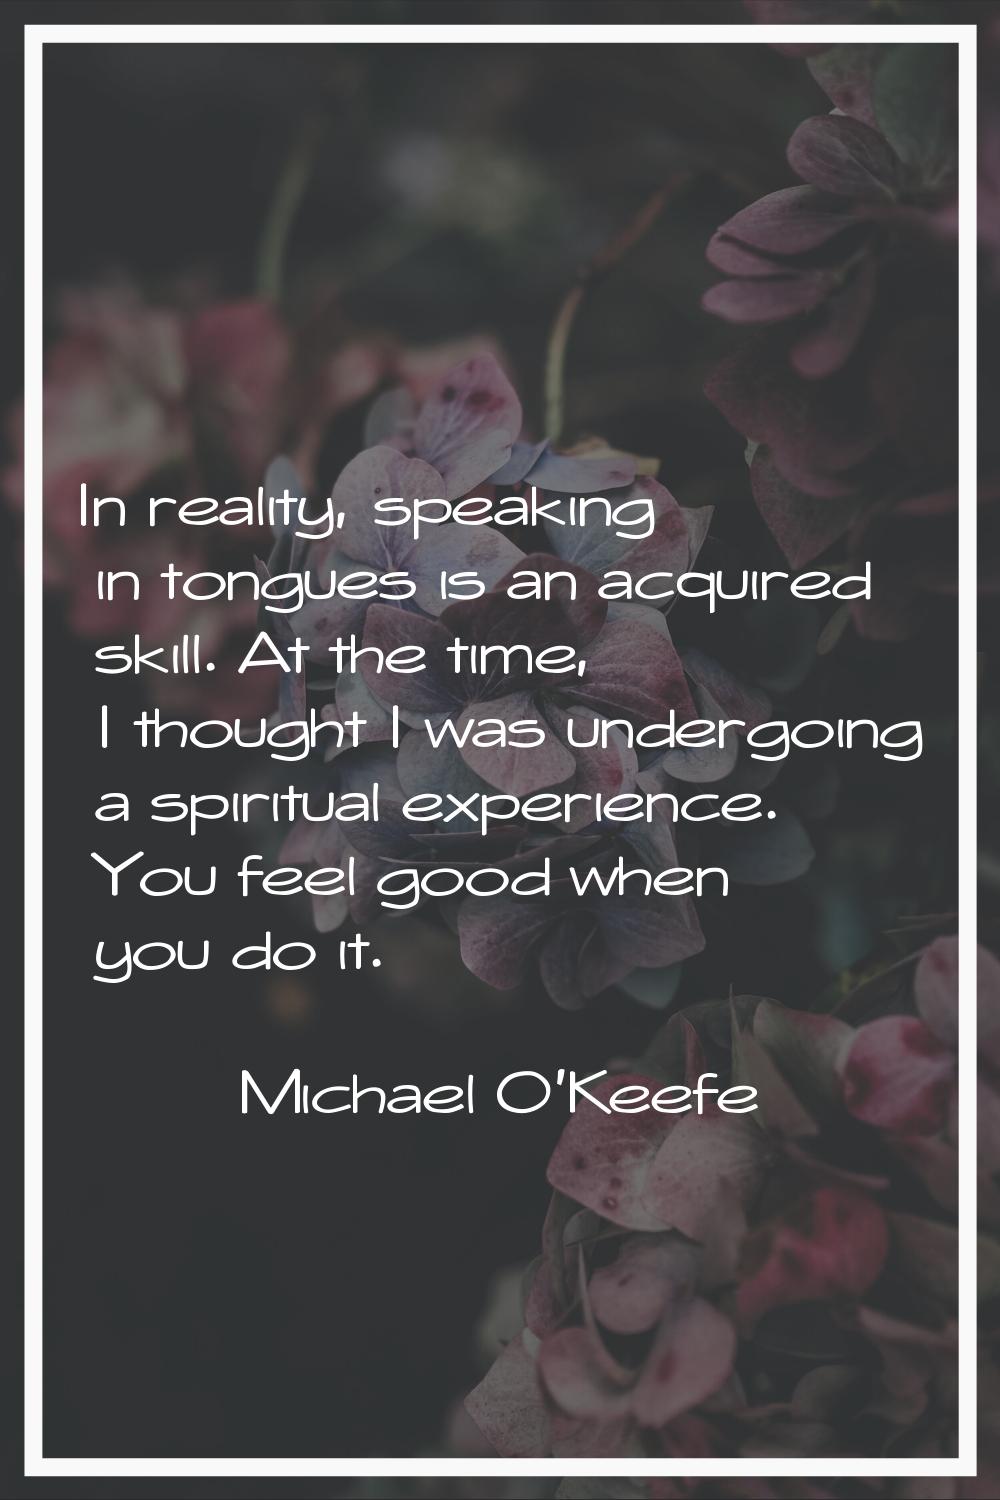 In reality, speaking in tongues is an acquired skill. At the time, I thought I was undergoing a spi